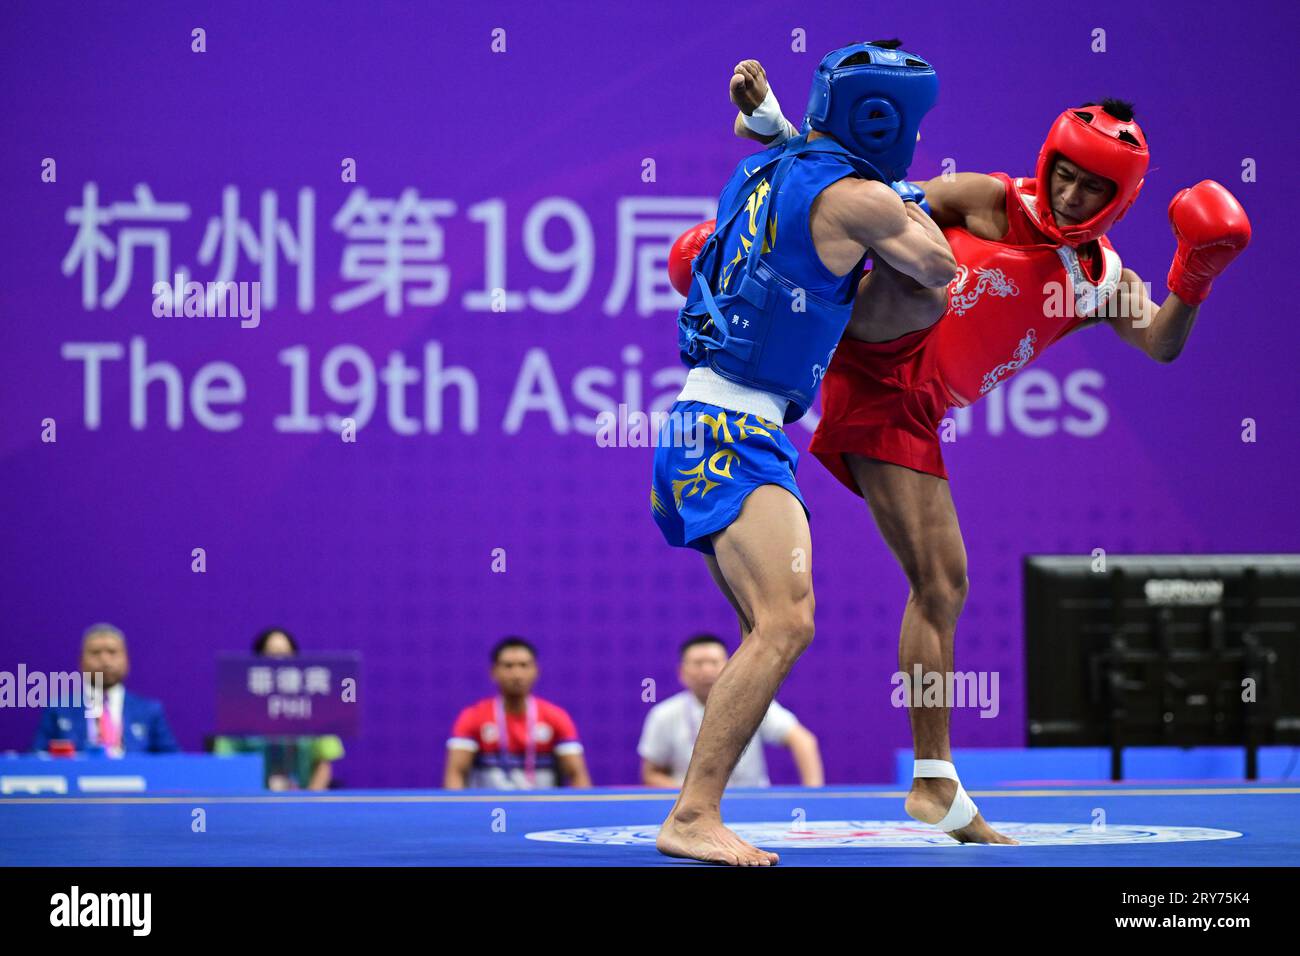 Hangzhou, China. 29th Sep, 2023. Arnel Mandal (R) of the Philippines and Jiang Haidong (L) of China compete during the Asian Games 2023, Wushu Sanda Men's 56Kg Final match at Xiaoshan Guali Sports Centre. Jiang won the match by point difference. (Photo by Luis Veniegra/SOPA Images/Sipa USA) Credit: Sipa USA/Alamy Live News Stock Photo